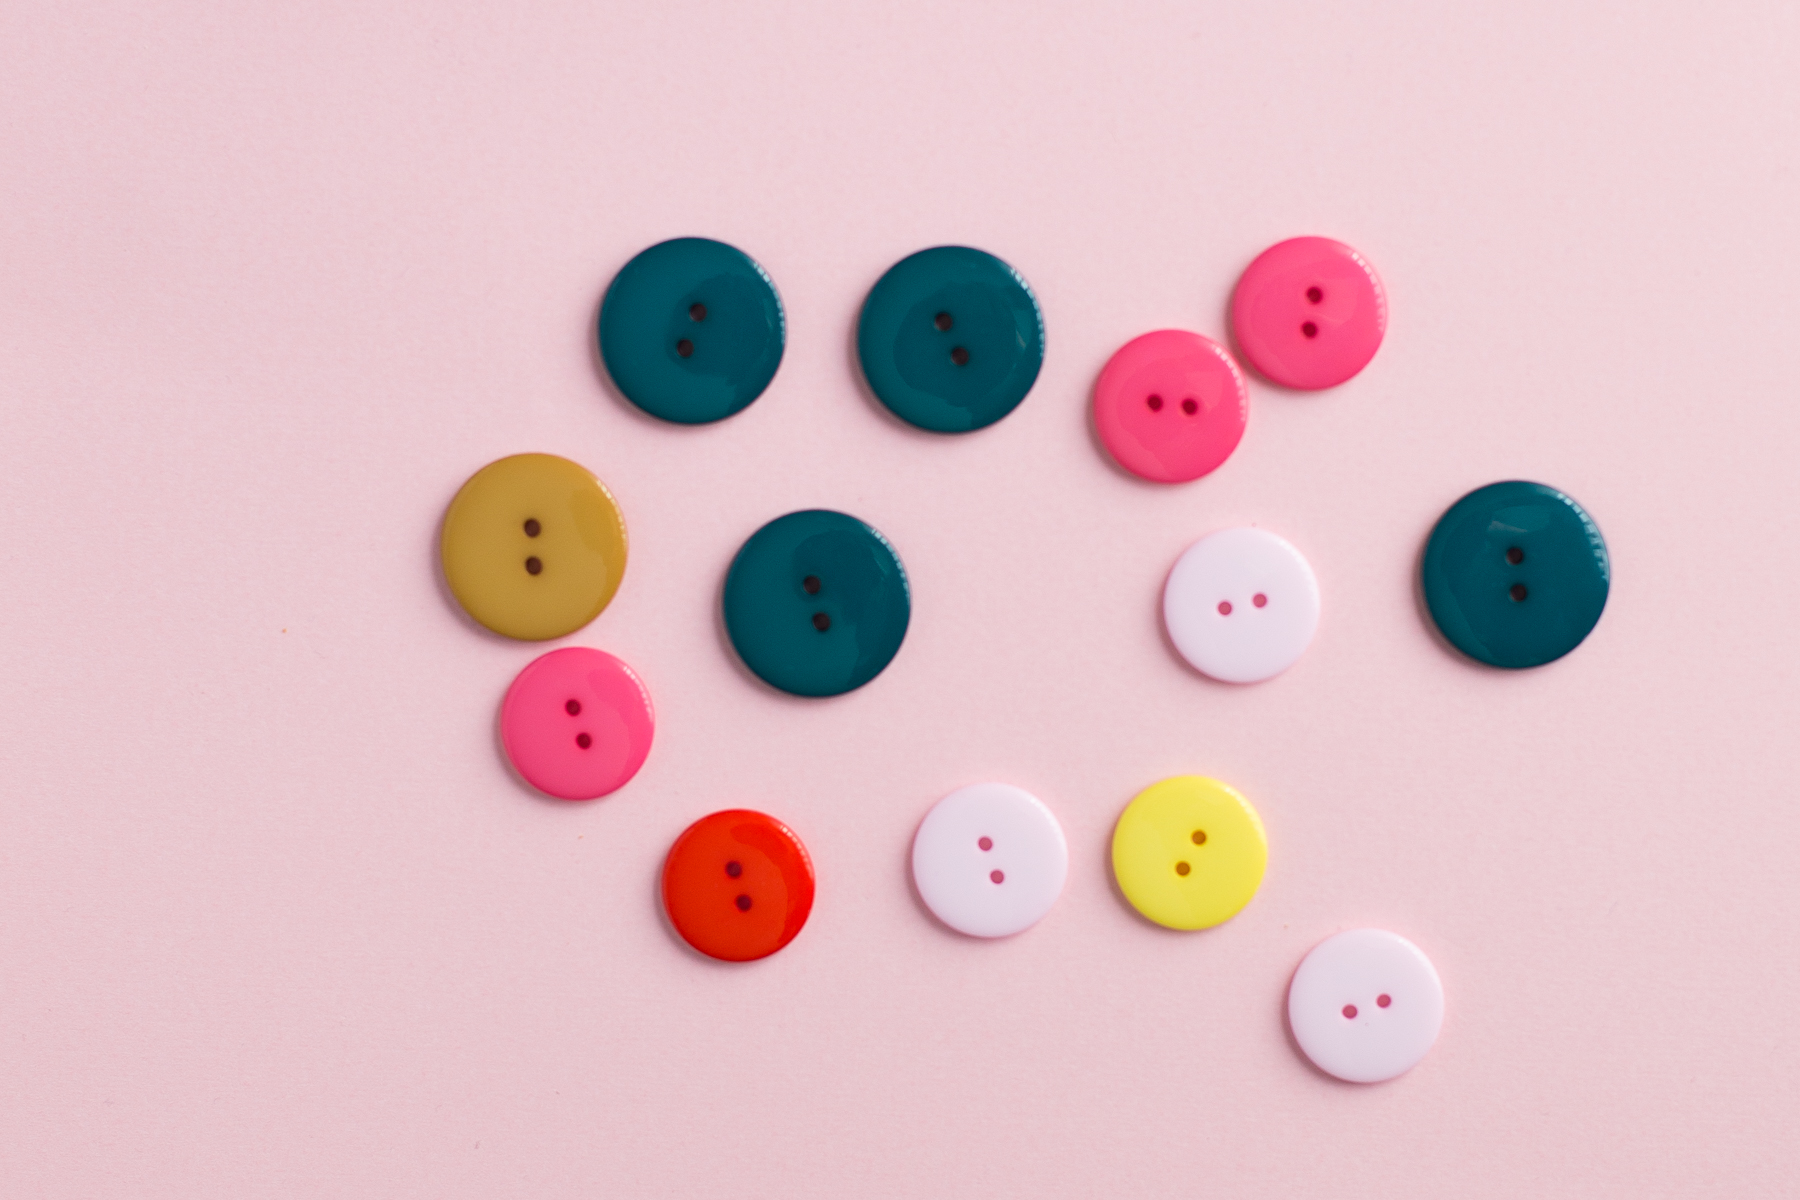 plastic buttons round knitting - Light pink plastic button | Medium | 23 mm | Round plastic button - 28/03/2018